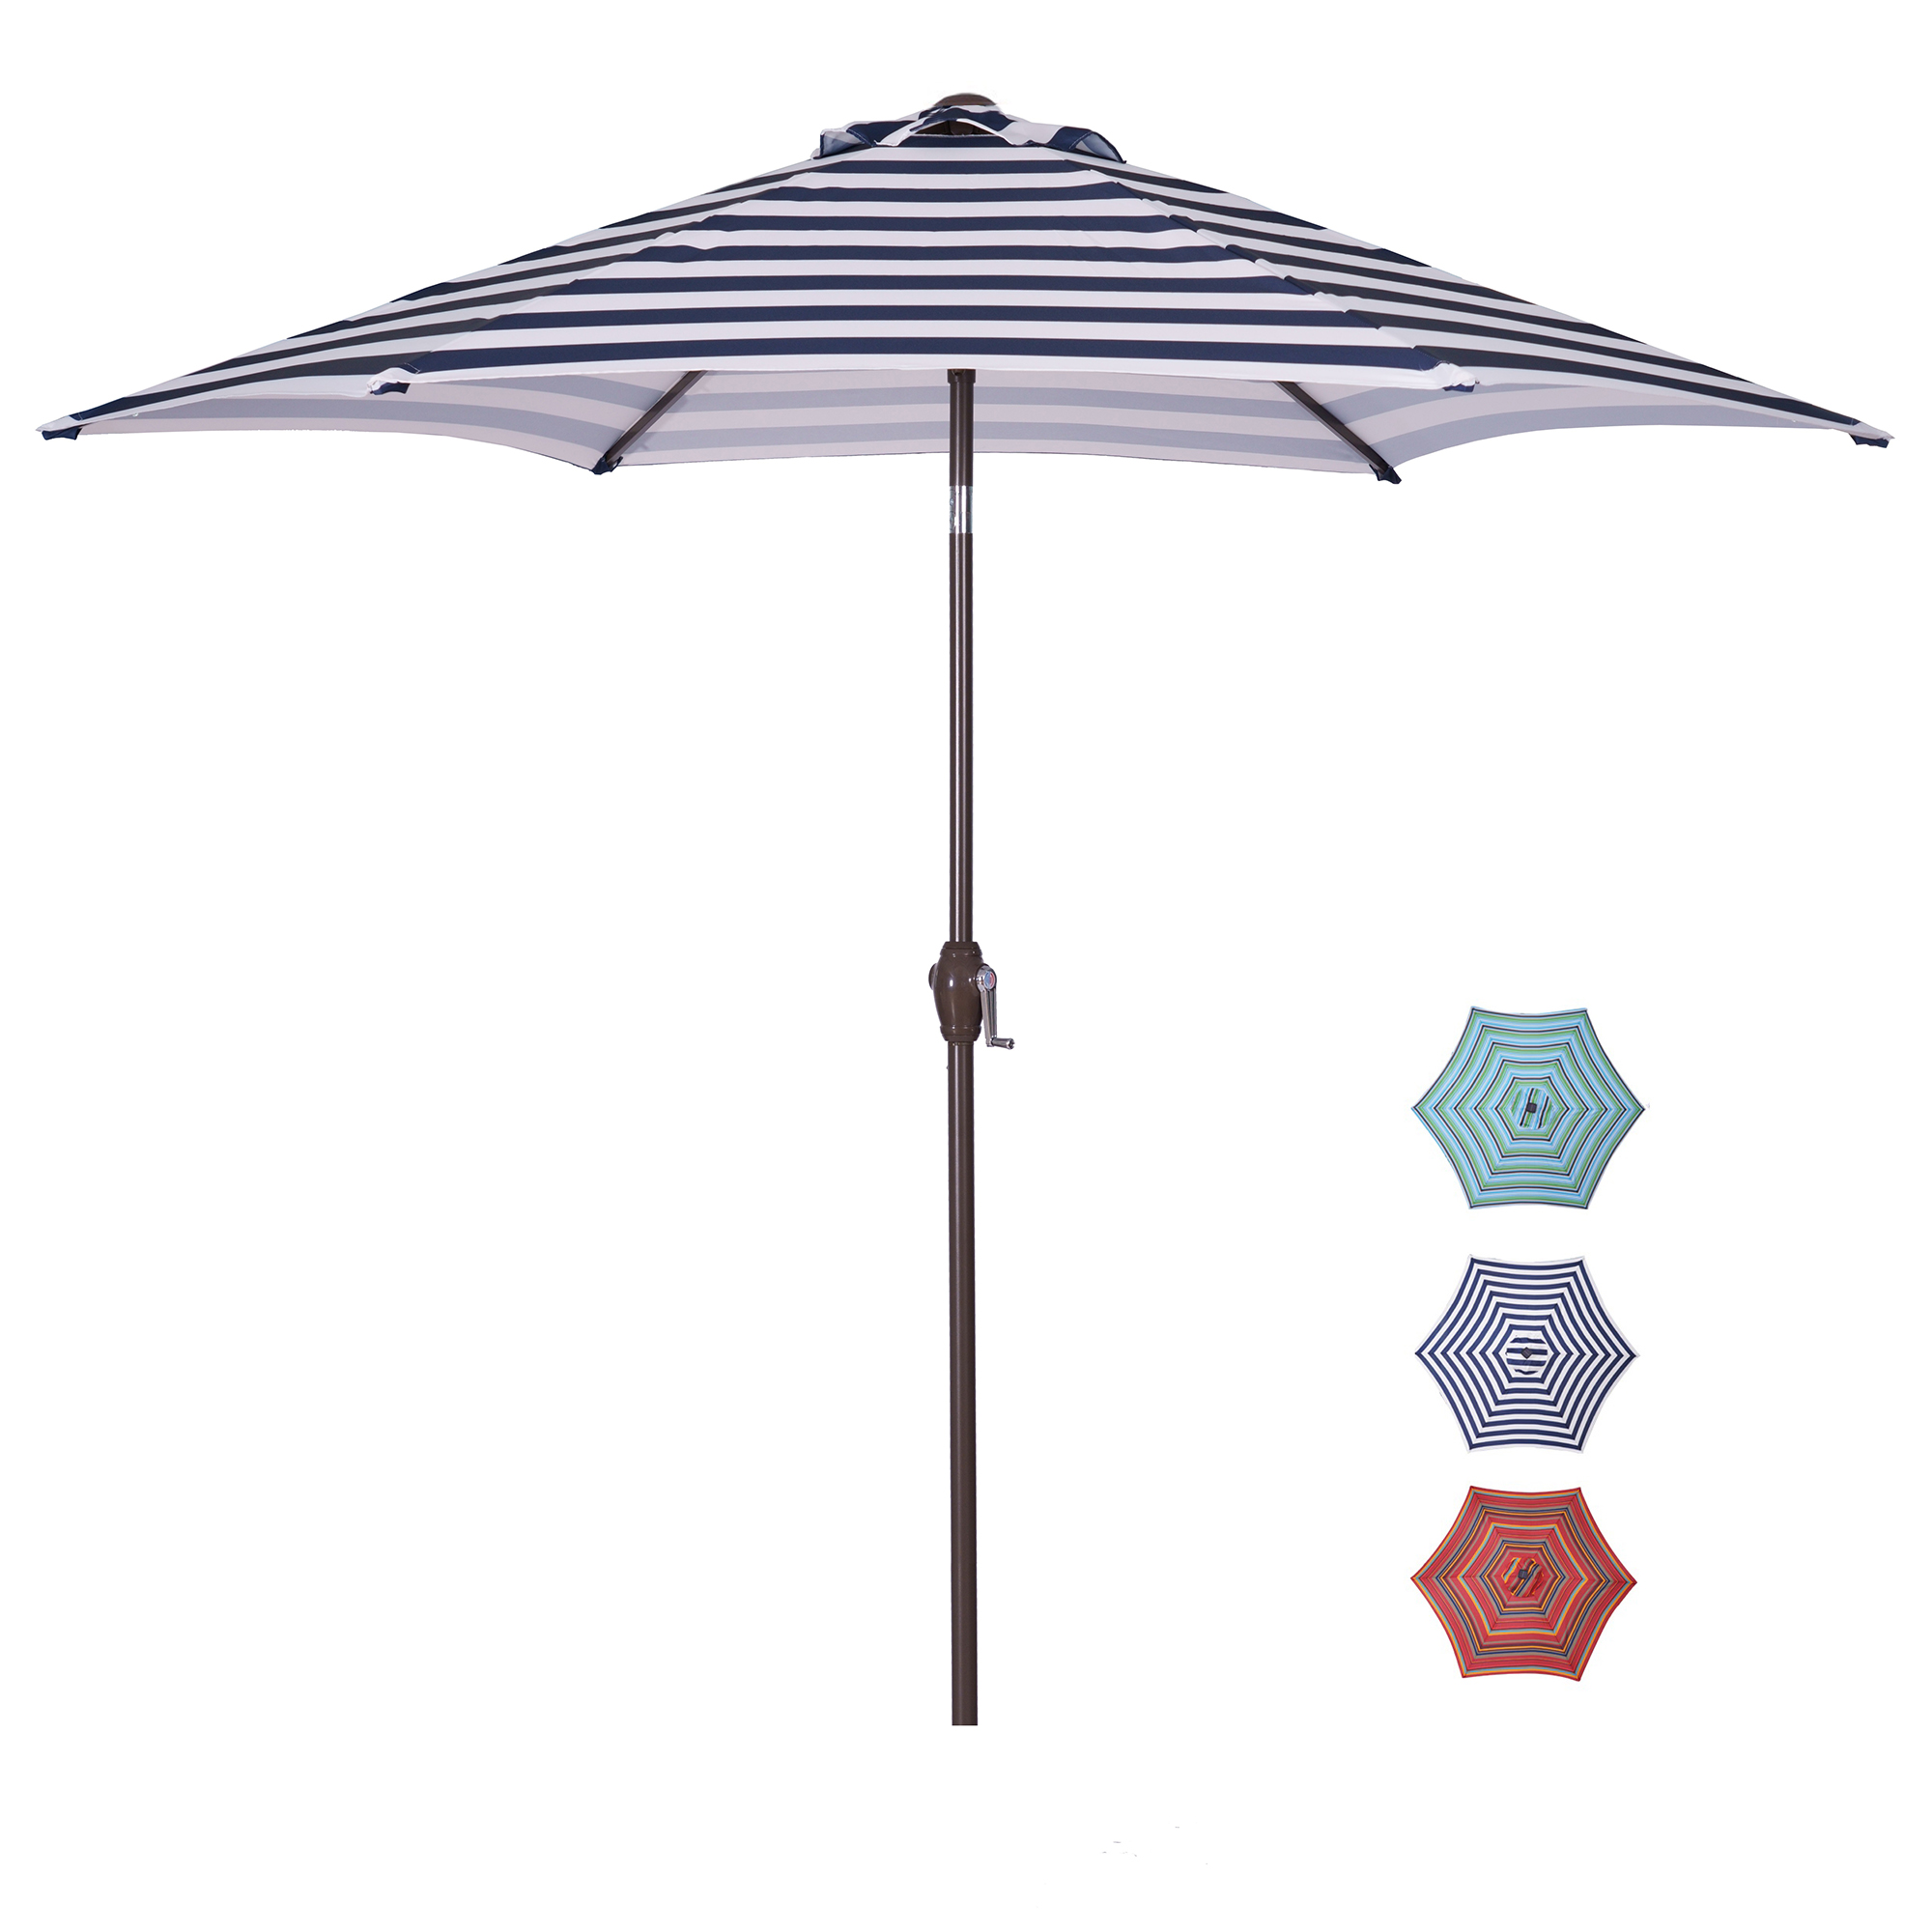 Outdoor Patio 8.6-Feet Market Table Umbrella With Push Button Tilt And Crank, Blue/White Stripes[Umbrella Base is not Included]-Boyel Living